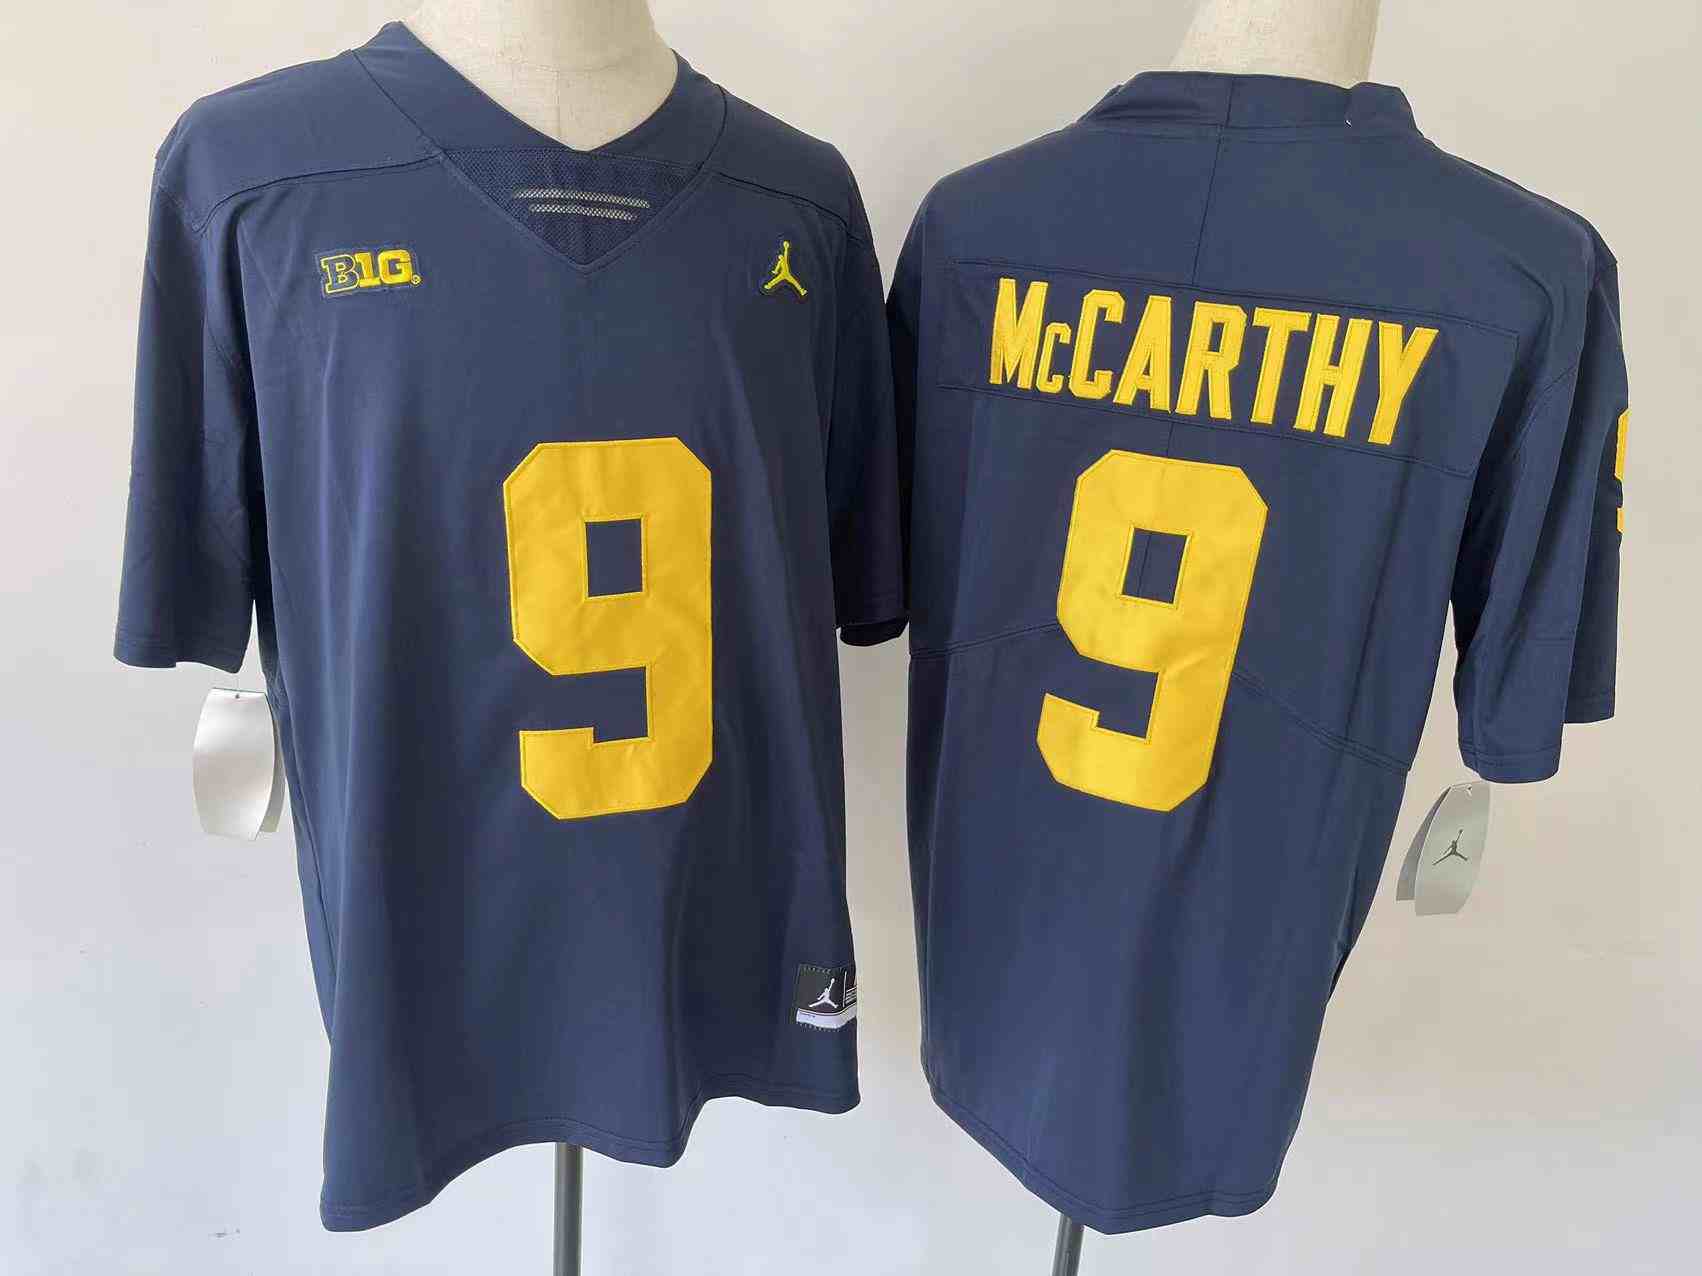 Youth Michigan Wolverines #9 McCARTHY blue Stitched Jersey